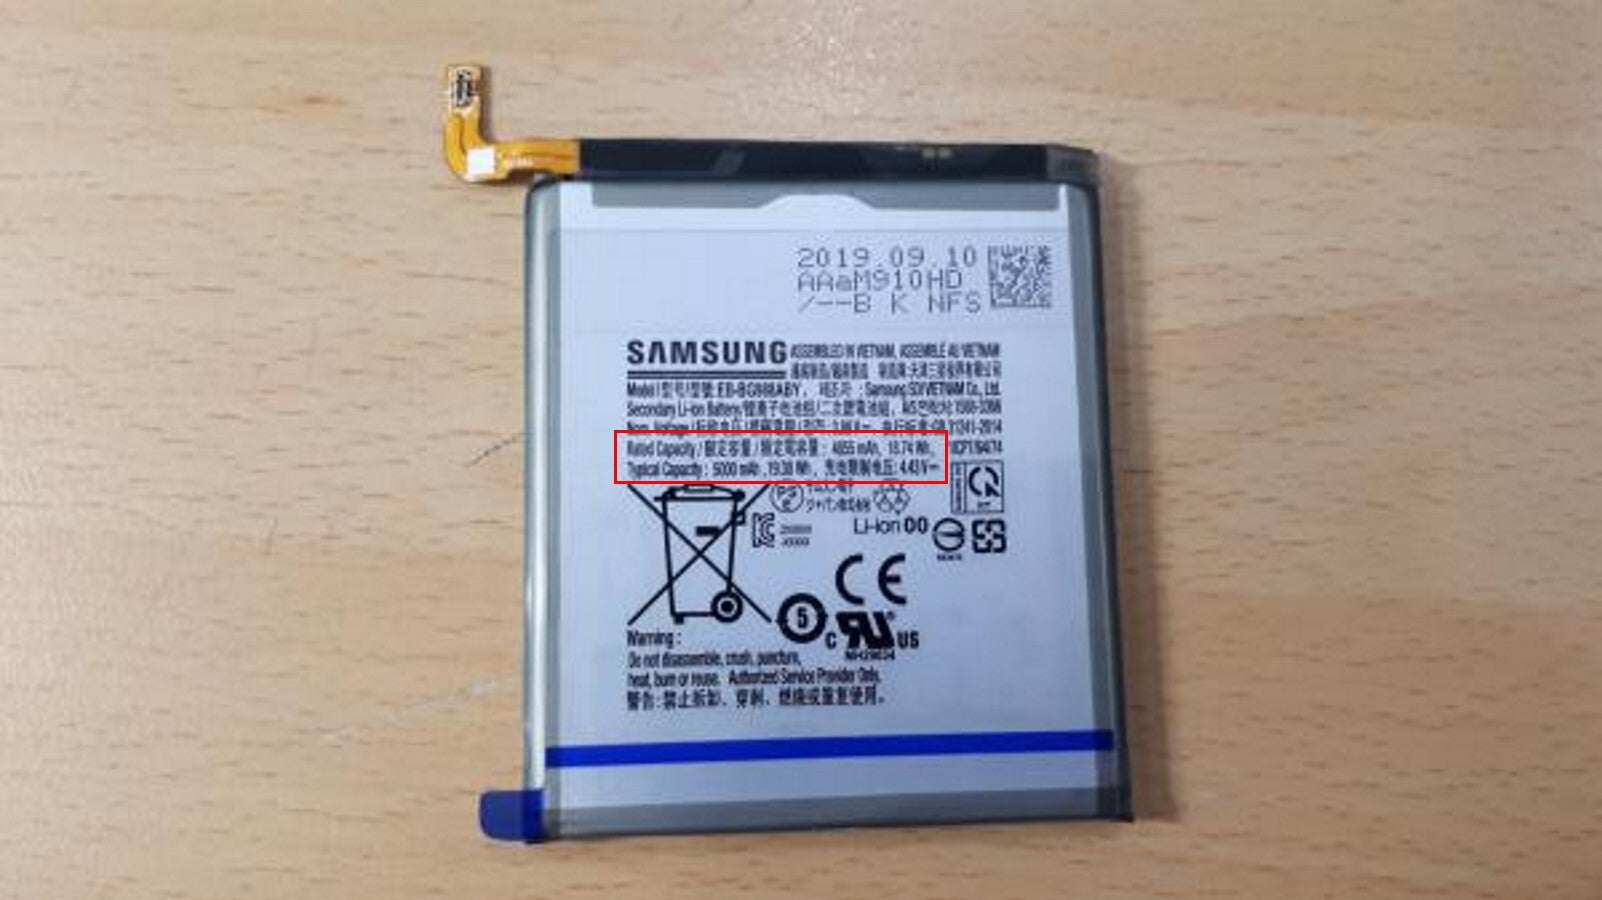 The FCC confirms that this 5000mAh unit is indeed the Galaxy S20 Ultra battery pack - All the new Galaxy S20 Ultra features and records to expect